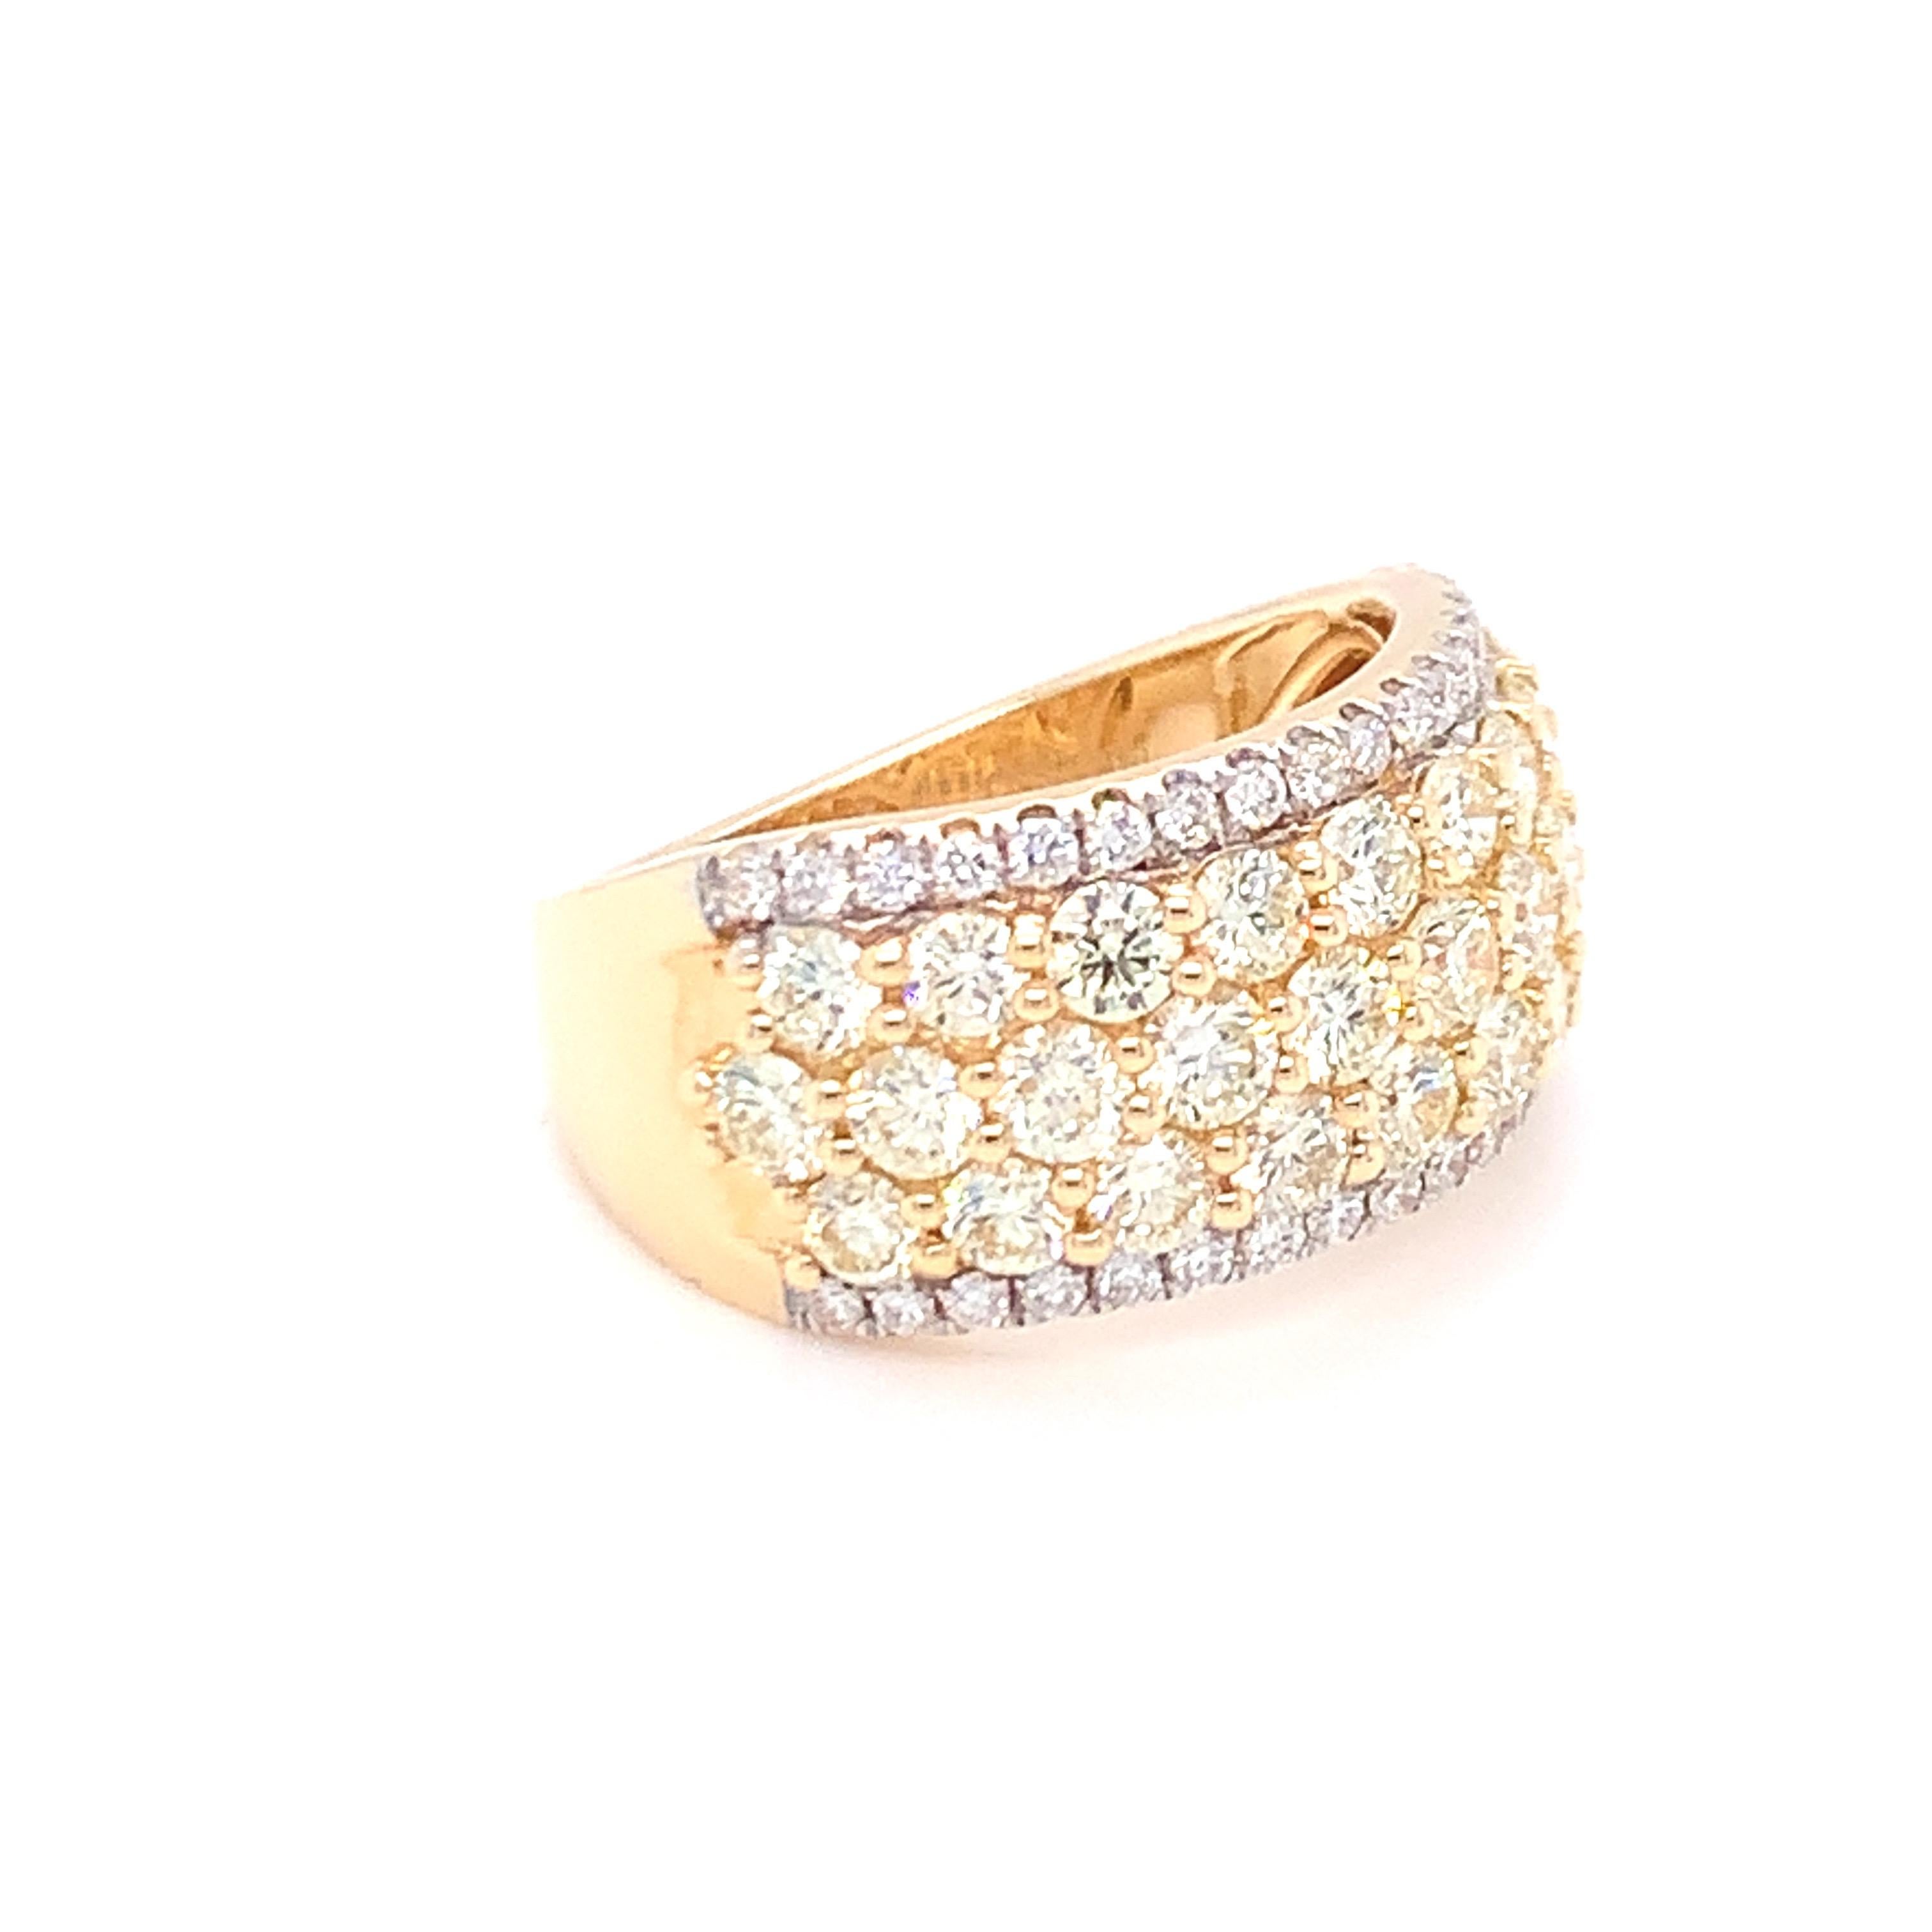 2.50 Carat Yellow & White Diamond Band Ring in 14k Yellow Gold For Sale 1